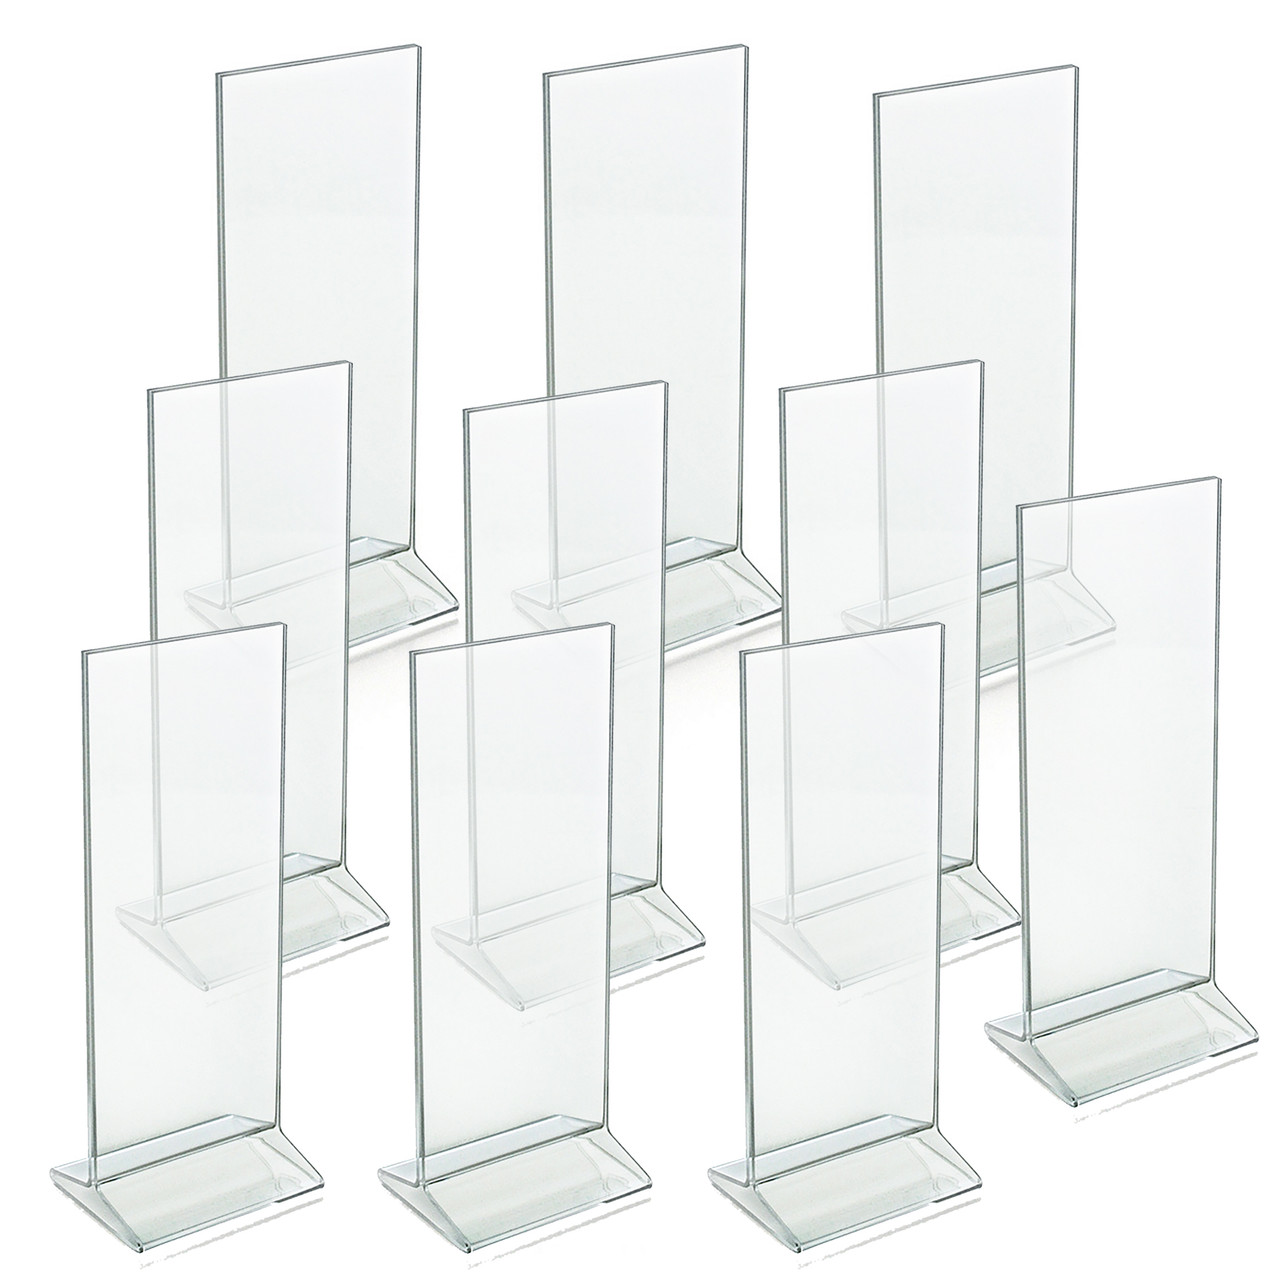 Top Loading Clear Acrylic T-Frame Sign Holder 4.25